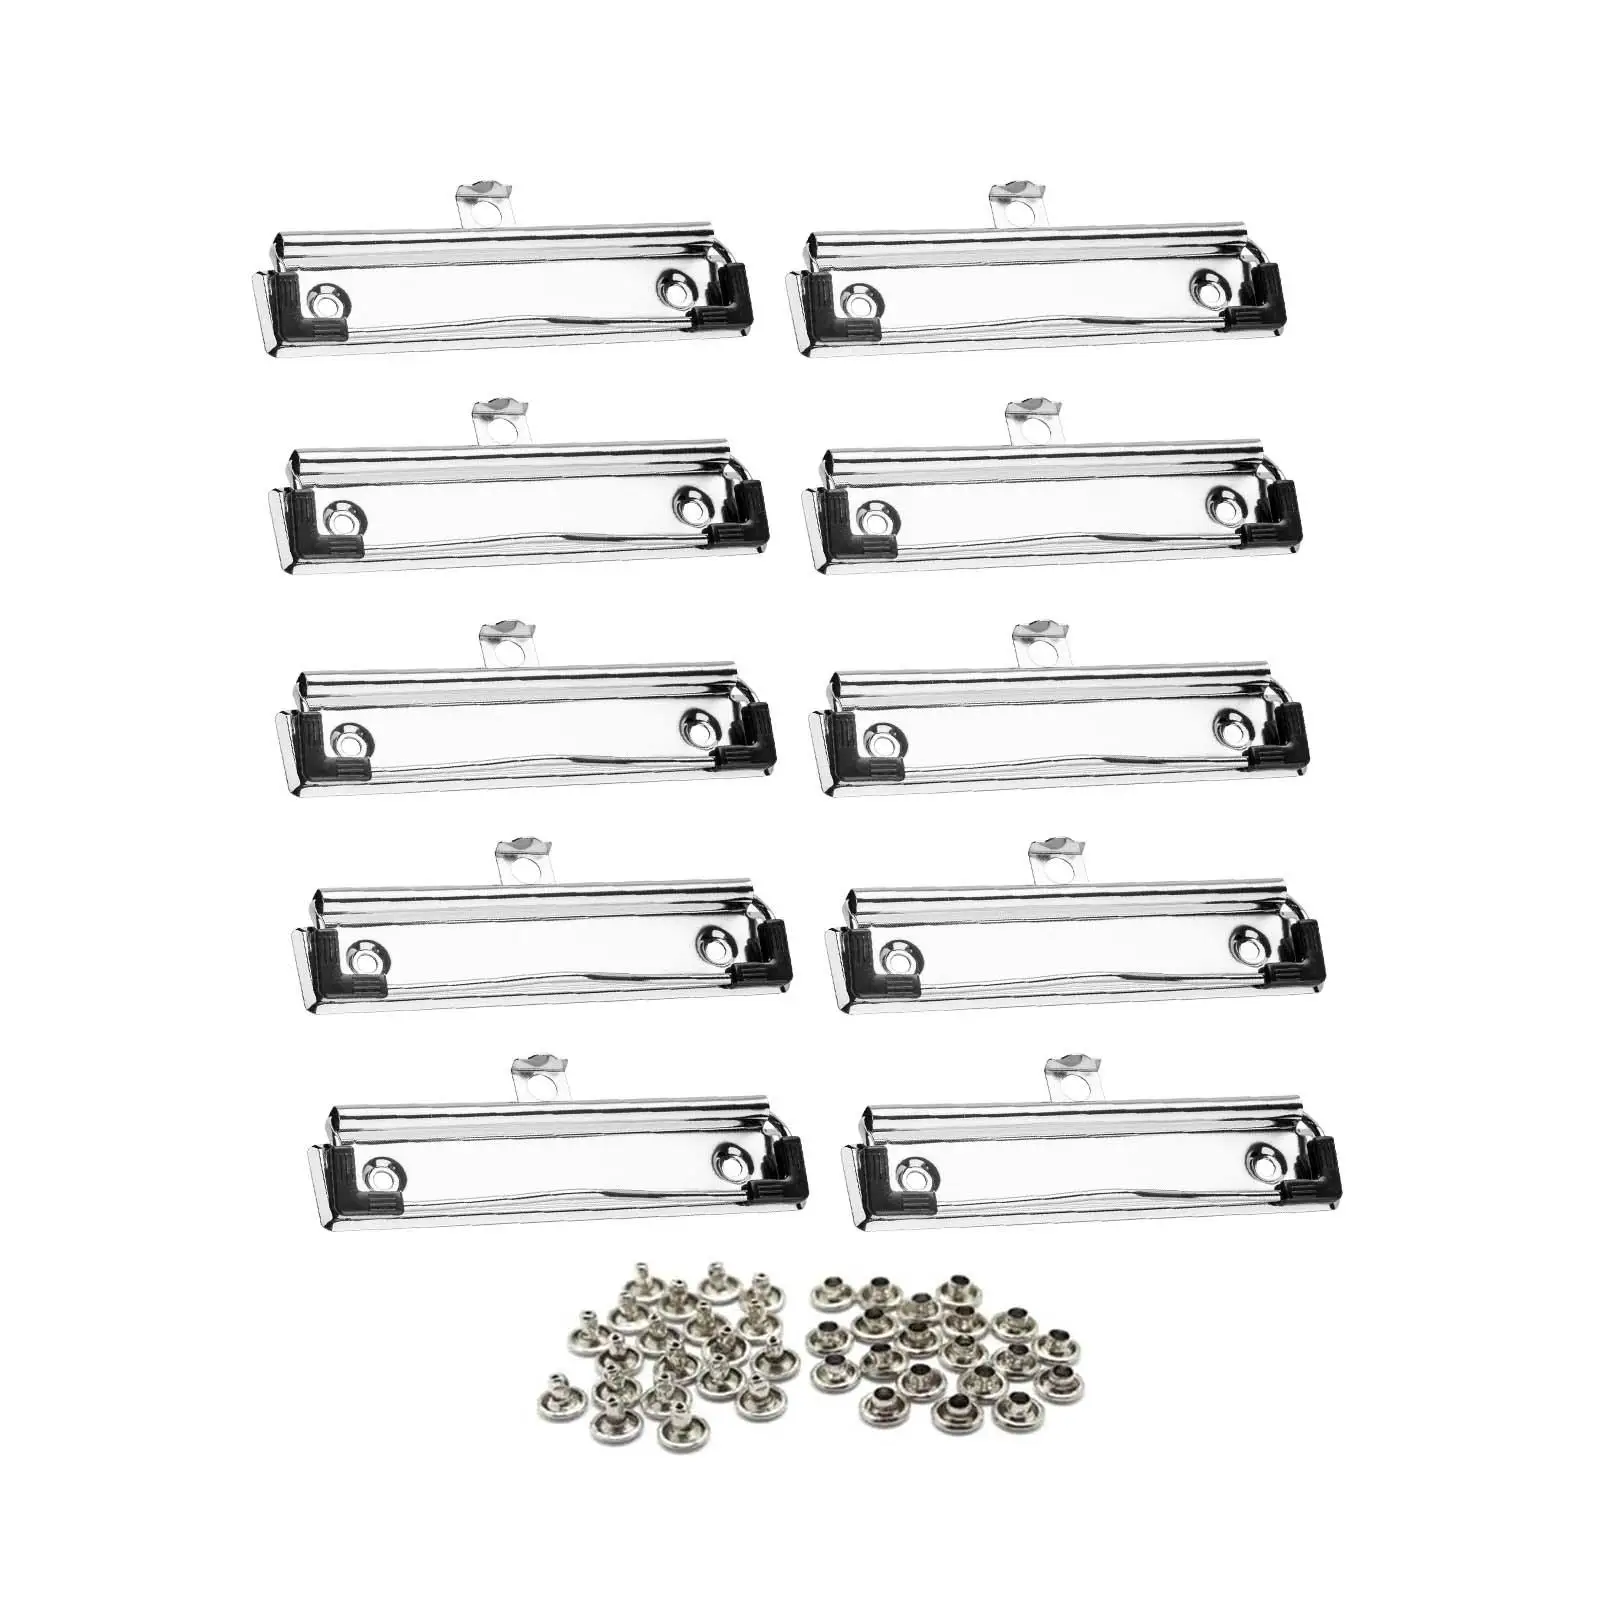 10x Mountable Iron Clipboard Clips Replacement Stationery Supplies Clipboard Clamp Hardware for Restaurant Office Business